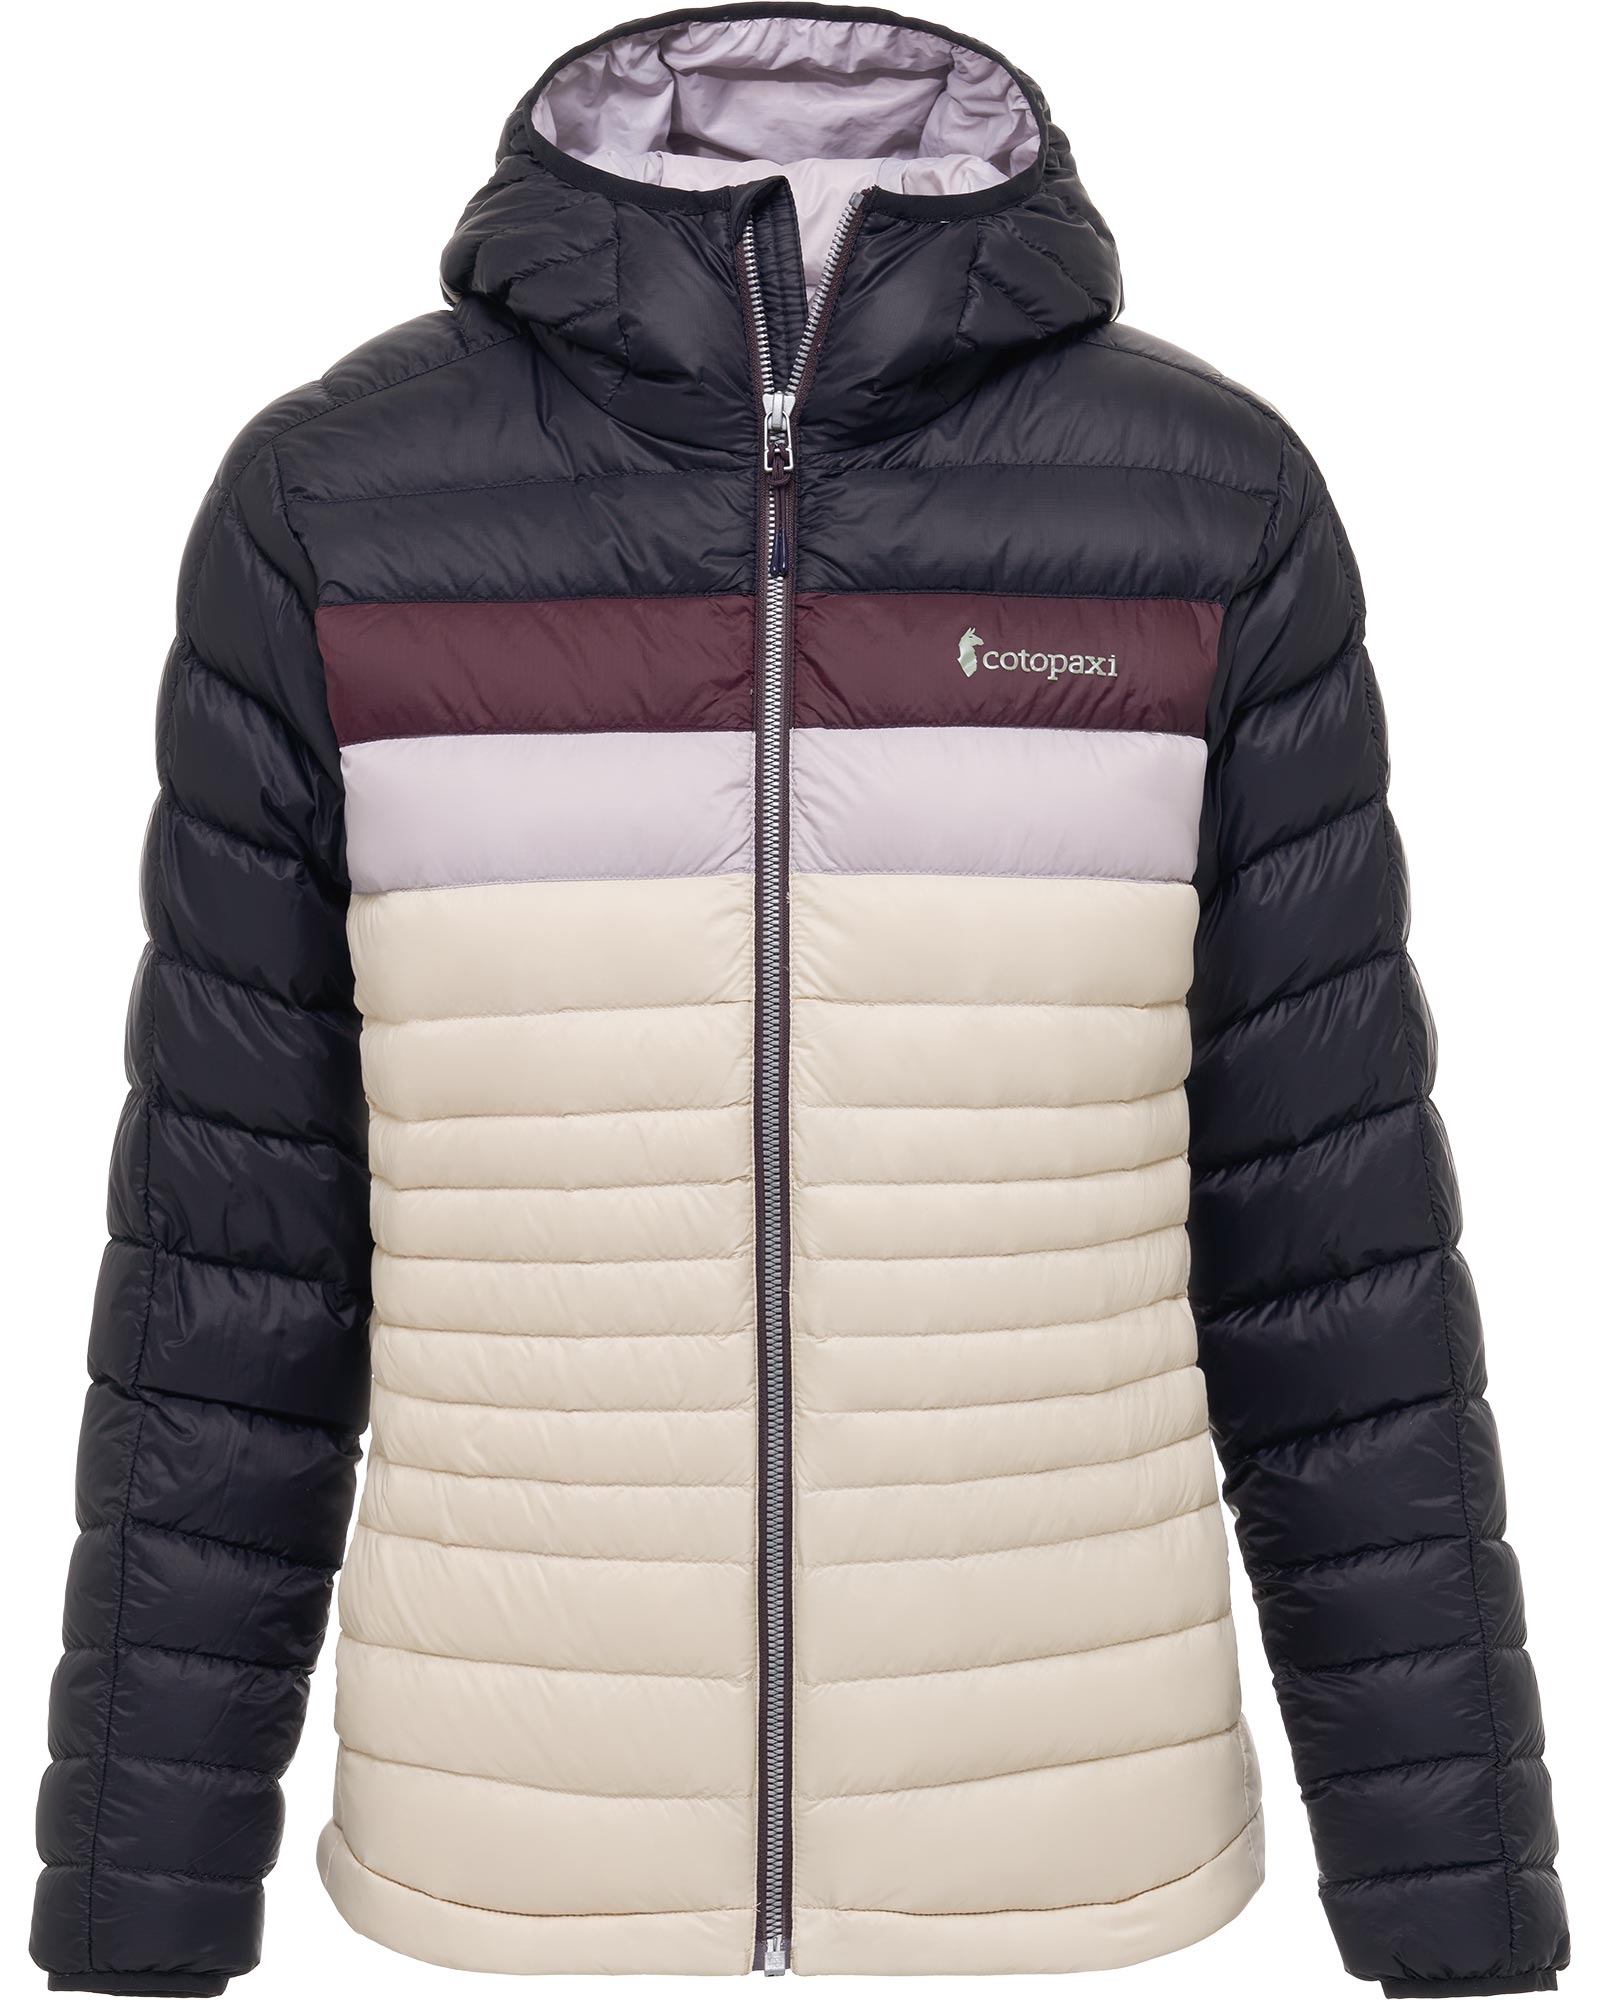 Cotopaxi Fuego Women’s Hooded Down Jacket - Black/Cream M